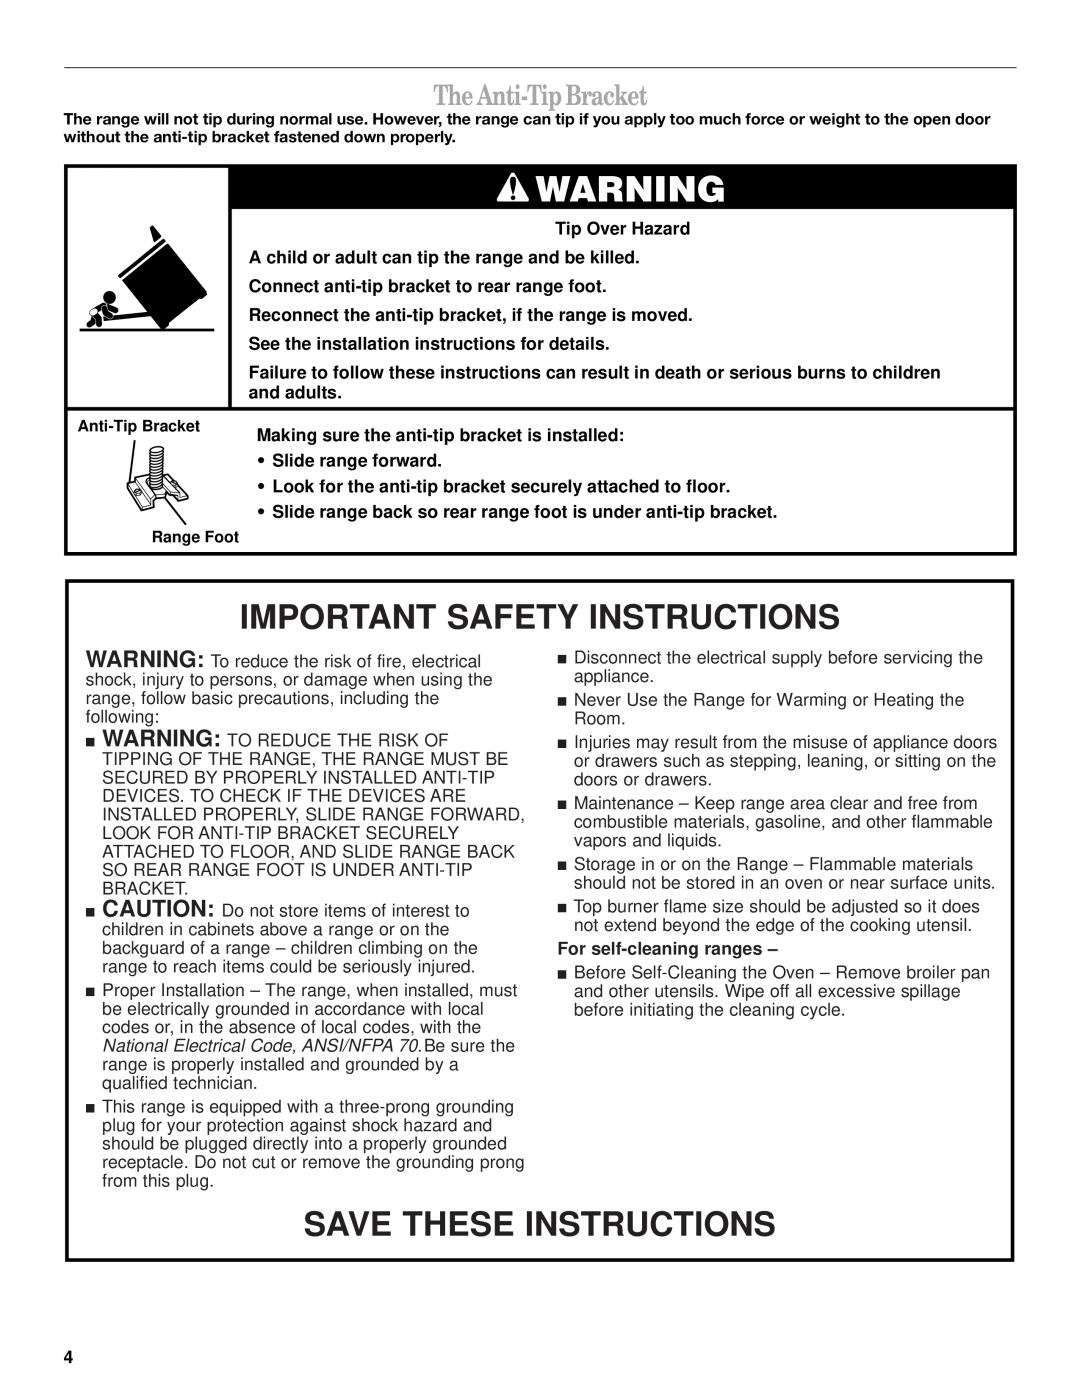 Whirlpool SF367LEK, SF369LEK The Anti-TipBracket, Important Safety Instructions, Save These Instructions, Tip Over Hazard 